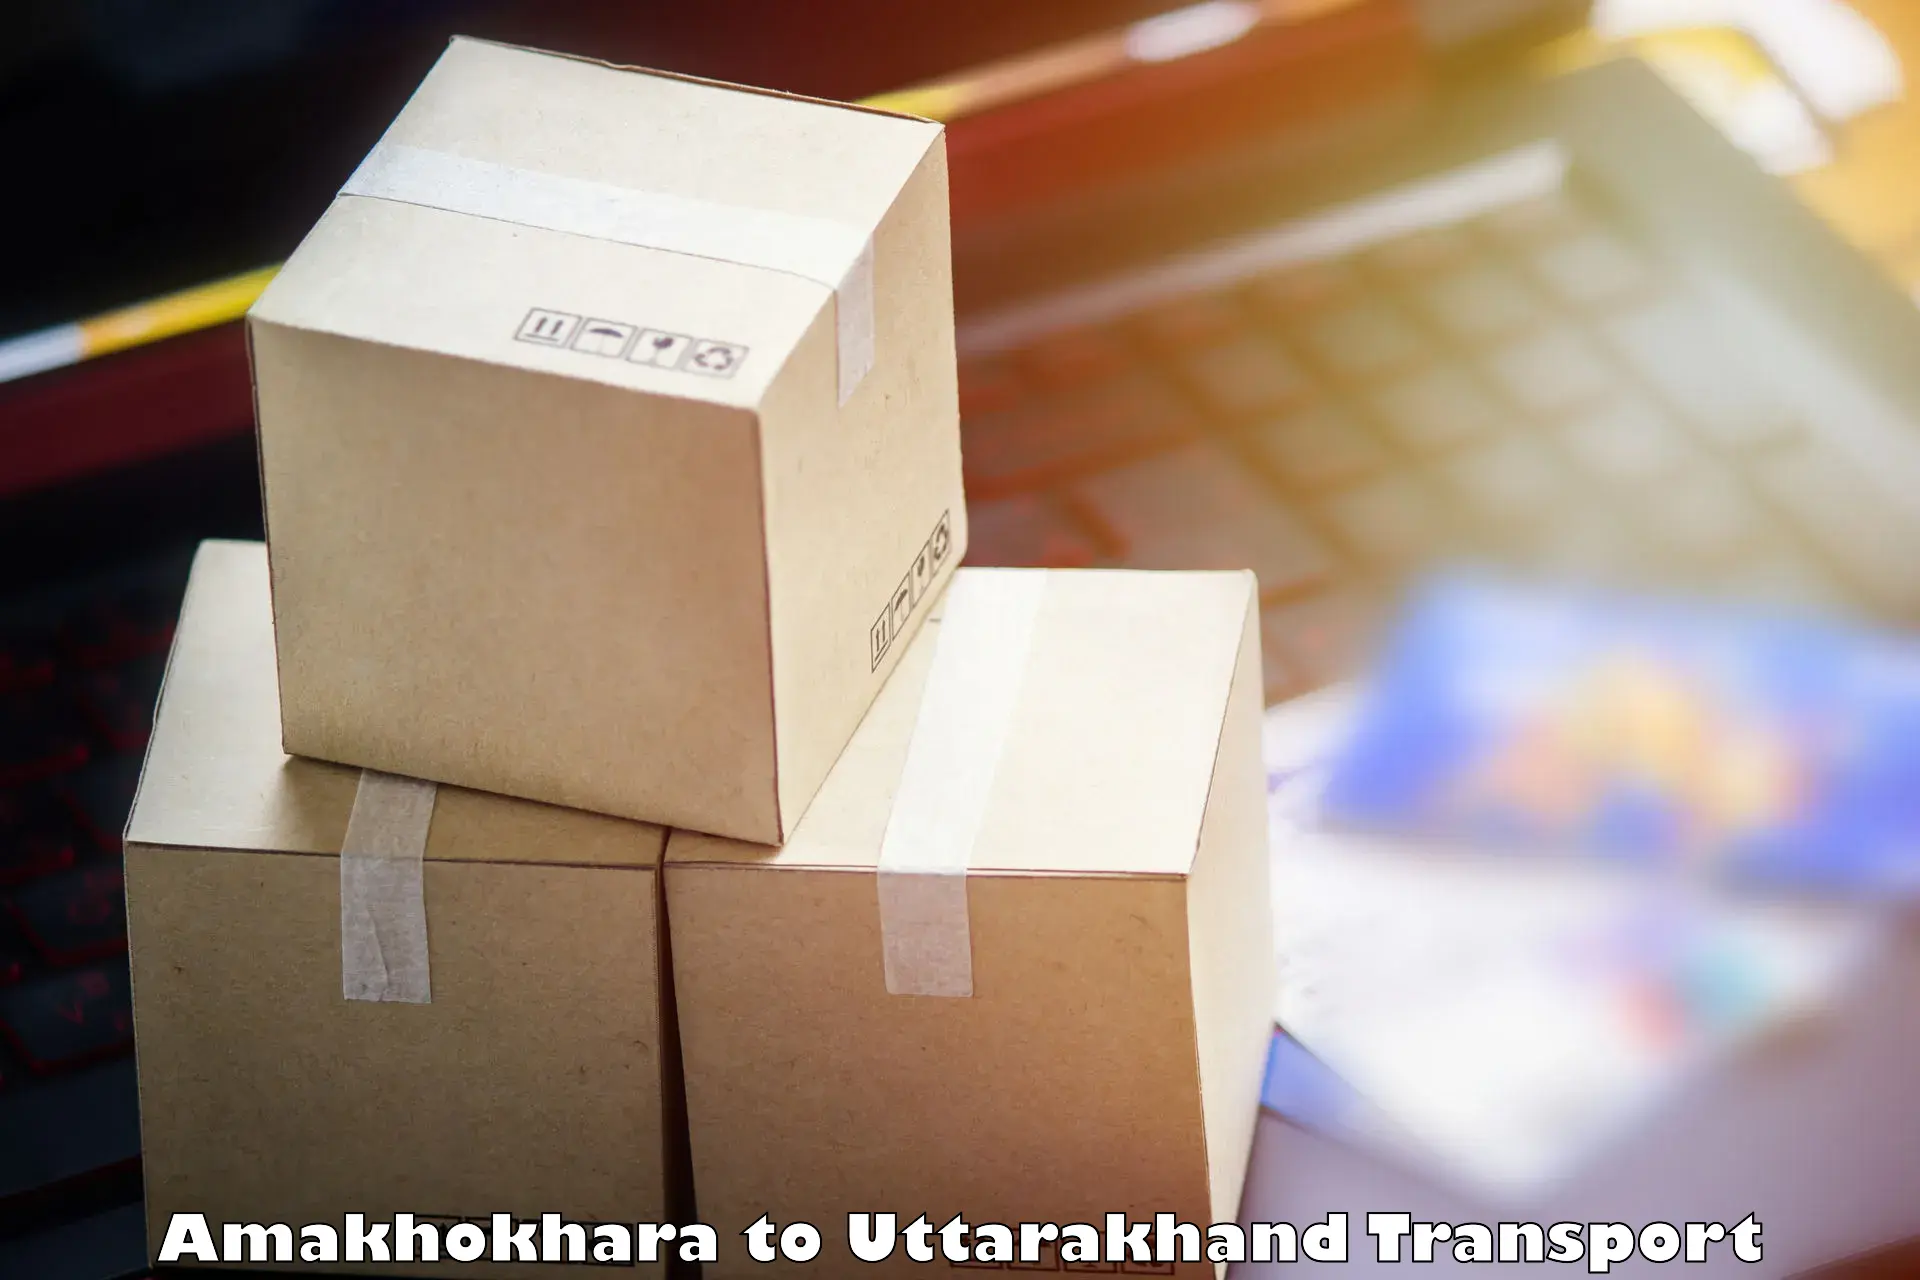 Air freight transport services Amakhokhara to Rishikesh